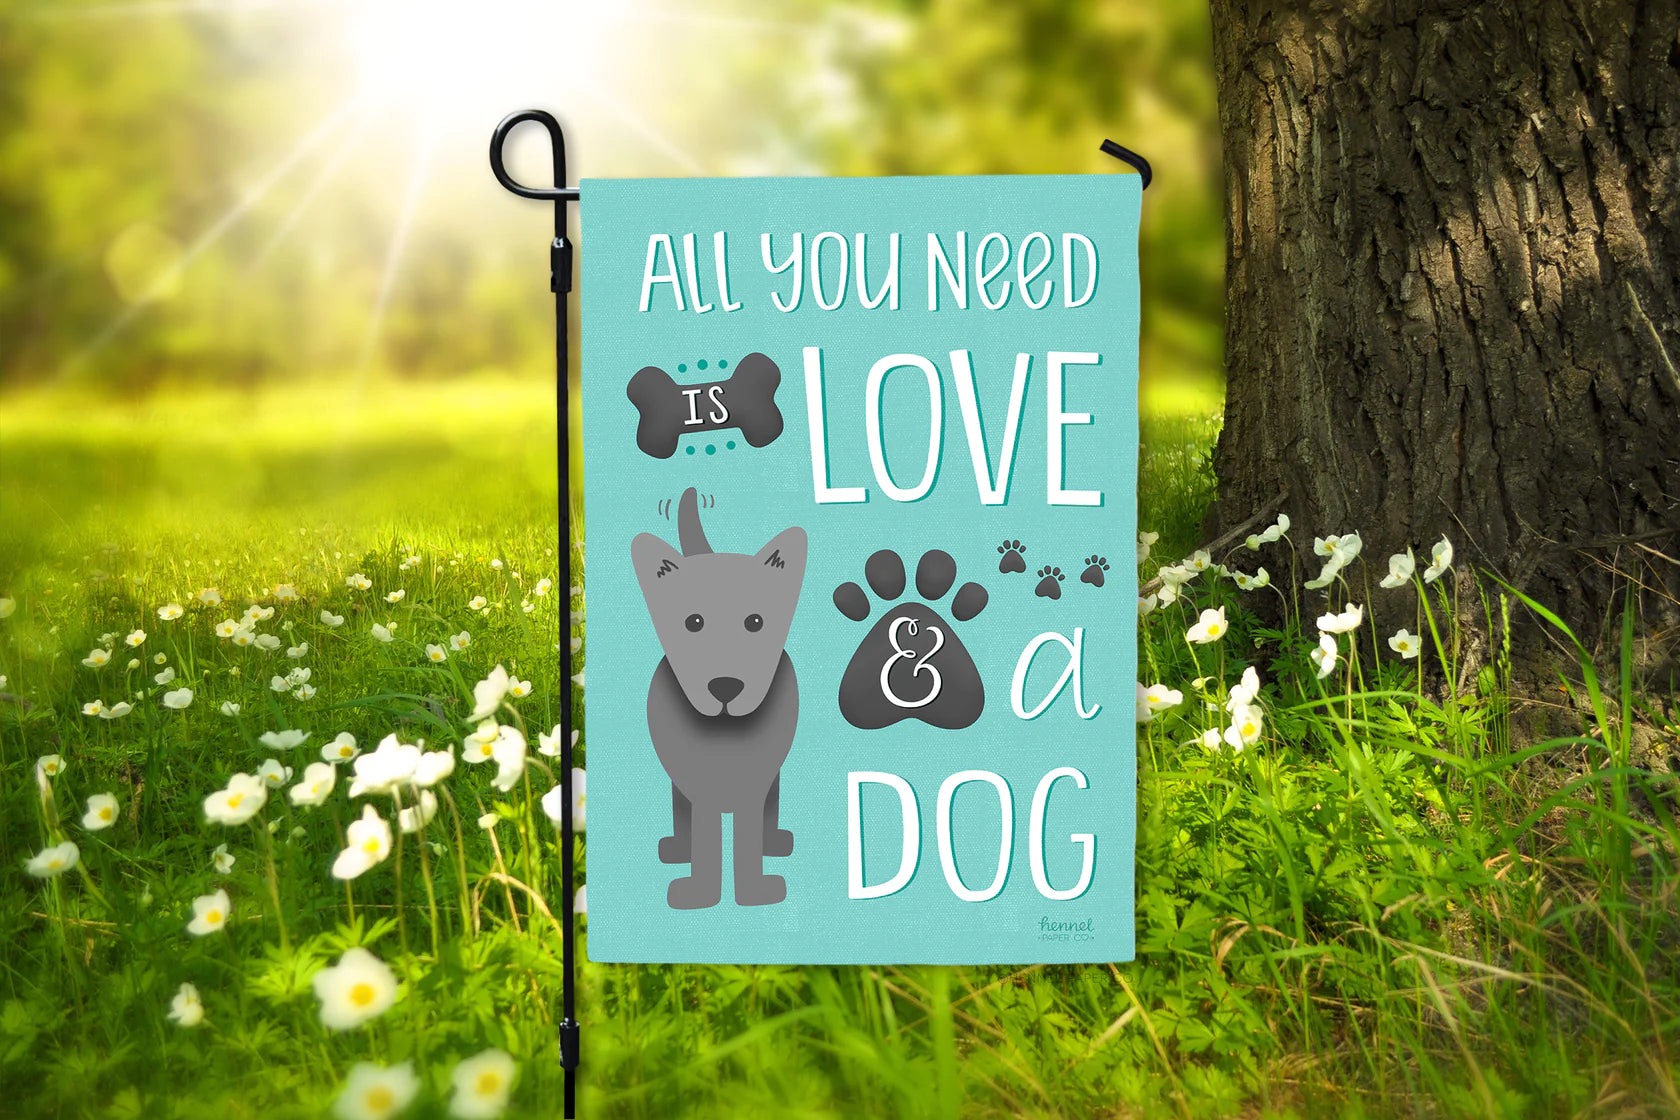 All you need is love and a dog garden flag